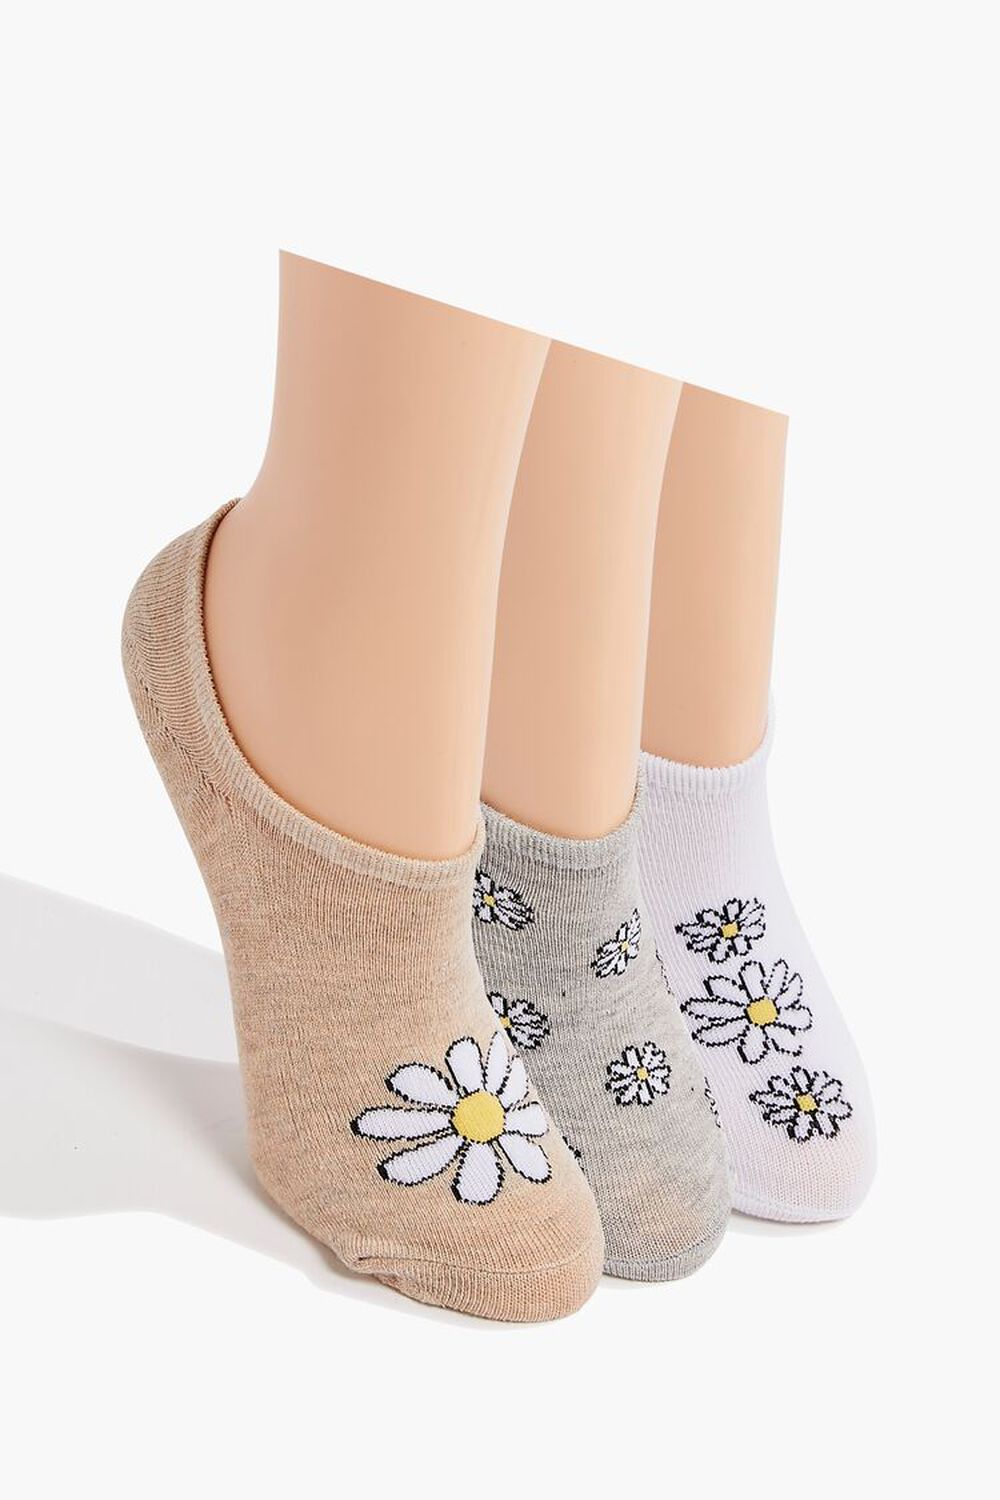 OATMEAL/MULTI Daisy Floral No-Show Socks - 3 pack, image 1